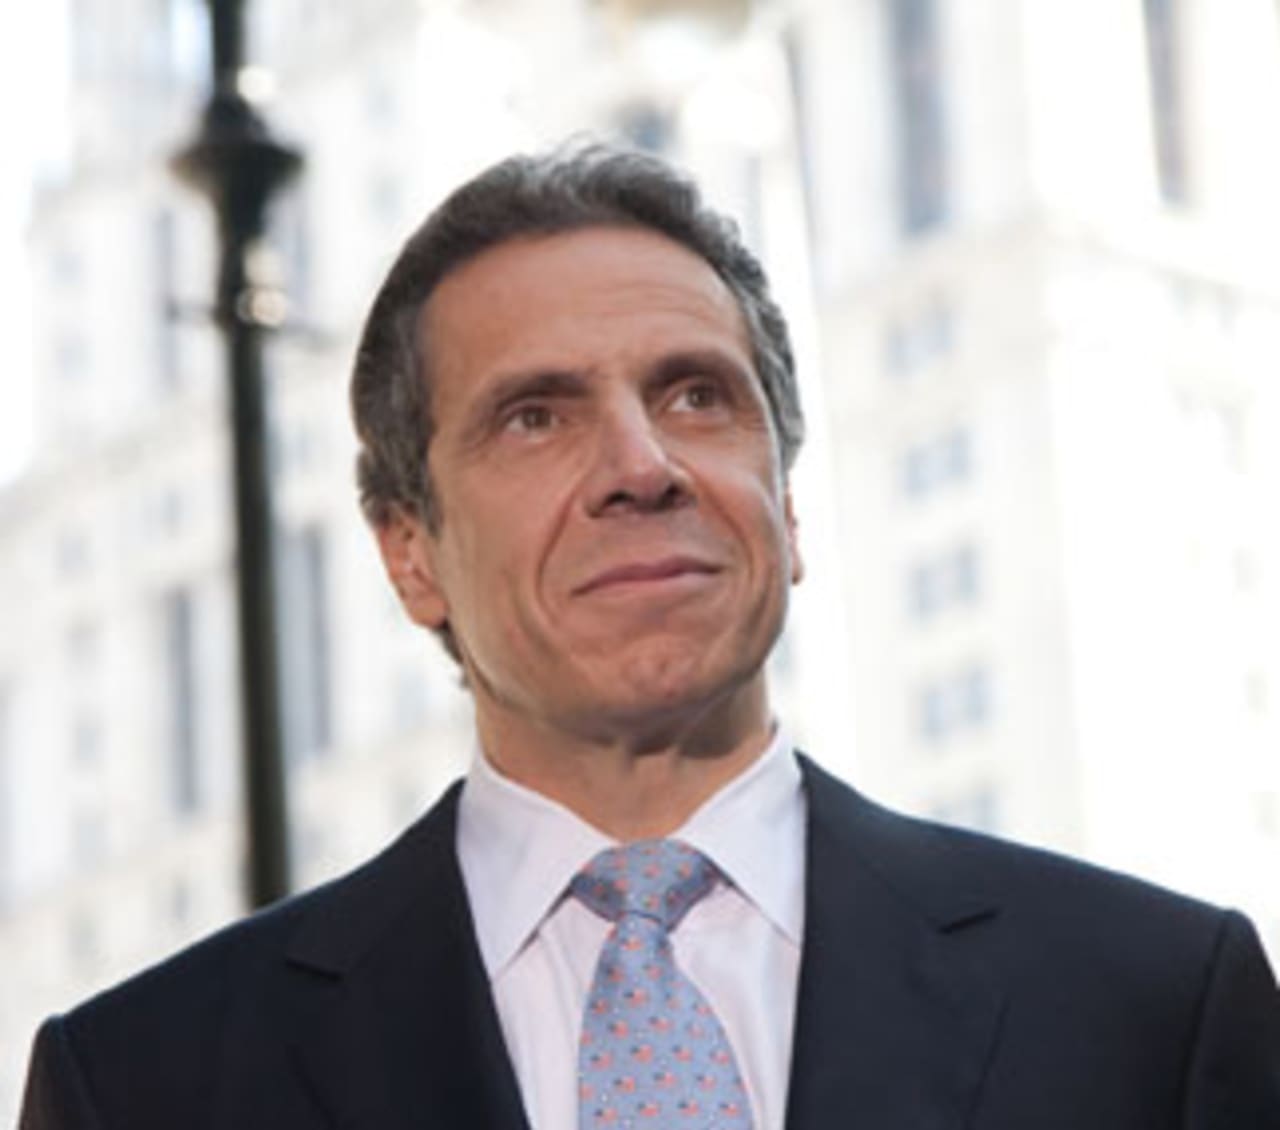 New York Gov. Andrew Cuomo is in hot water after using a racial slur during an interview.